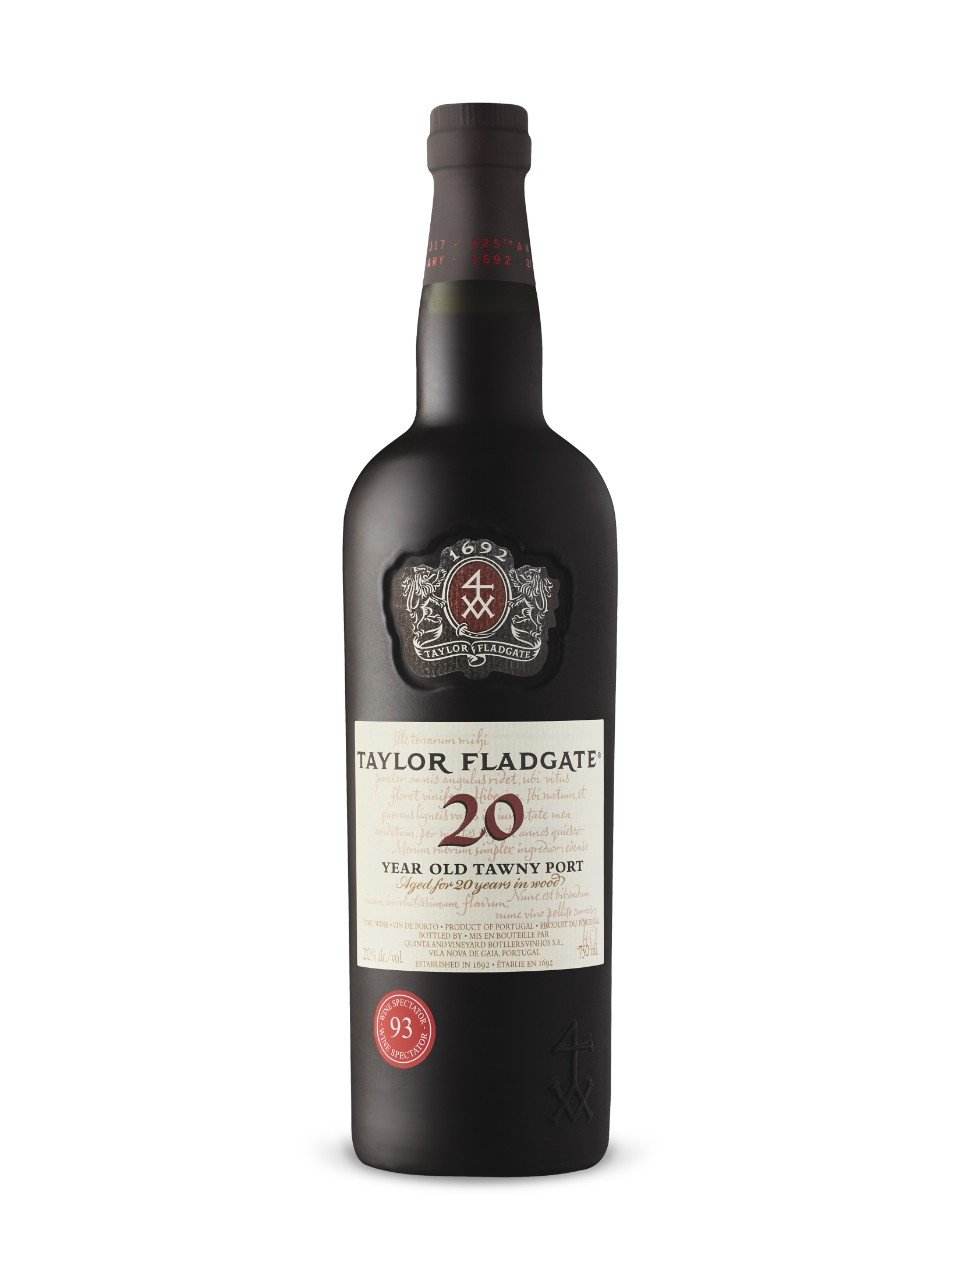 Taylor Fladgate 20-Year-Old Tawny Port | Exquisite Wine & Alcohol Gift Delivery Toronto Canada | Vyno